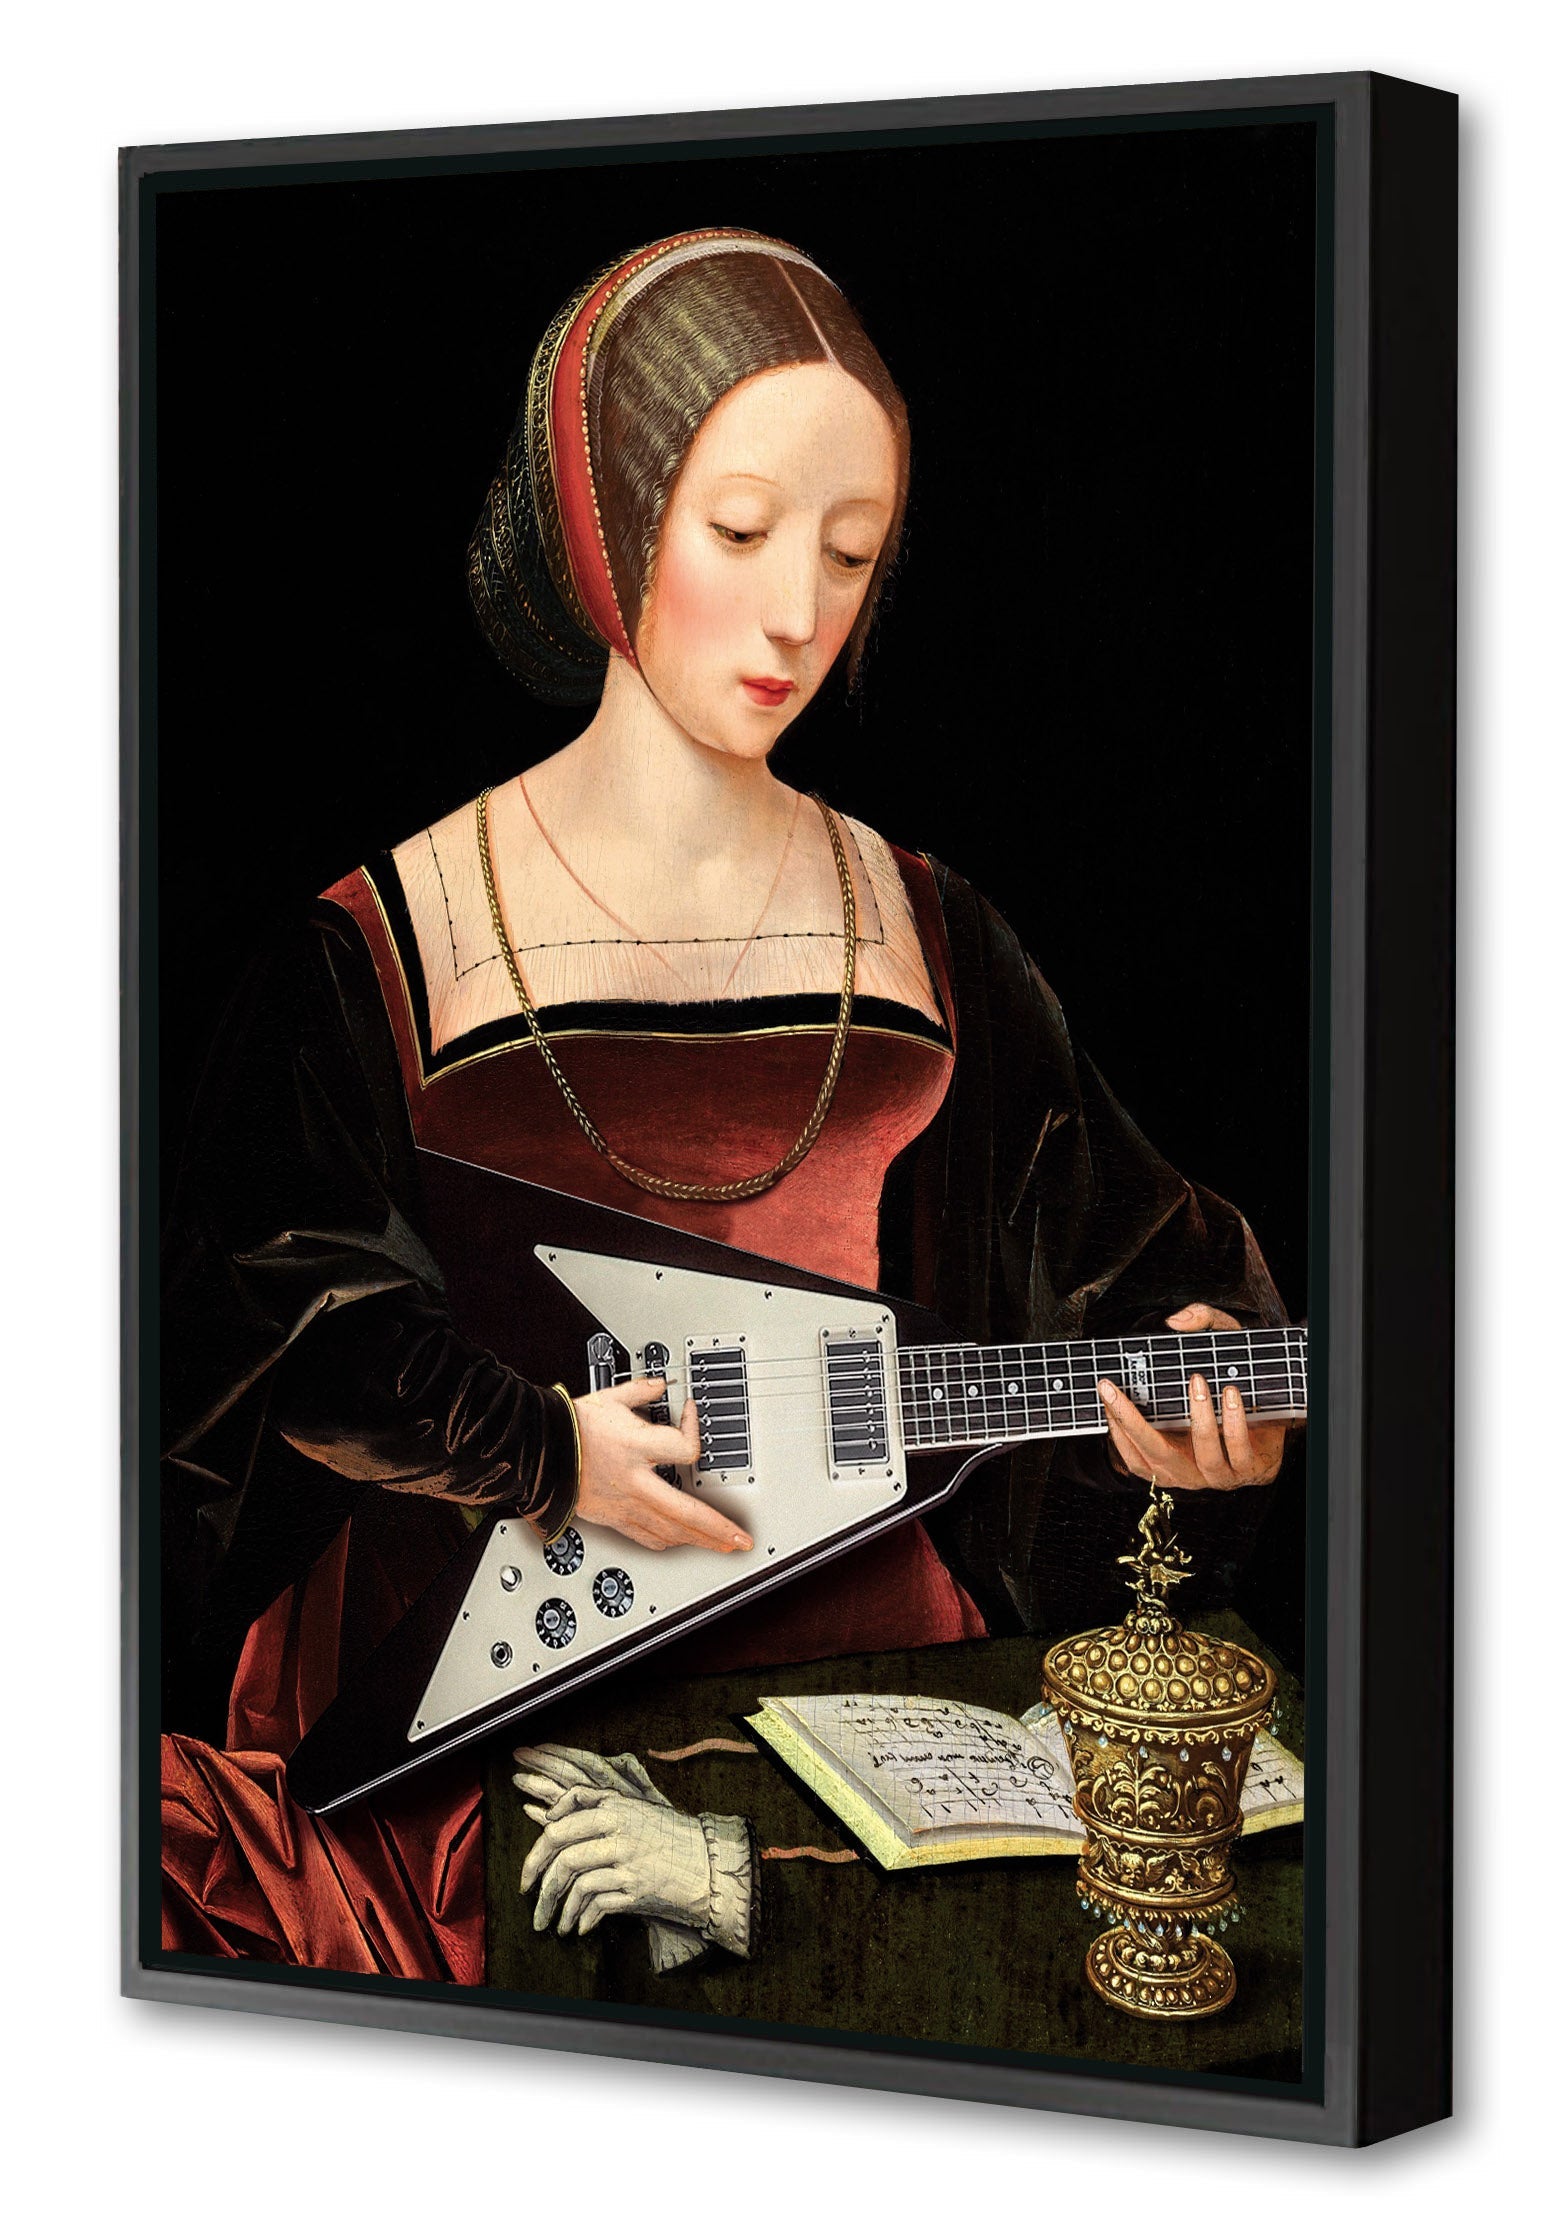 Guitare 2-historical, print-Canvas Print with Box Frame-40 x 60 cm-BLUE SHAKER